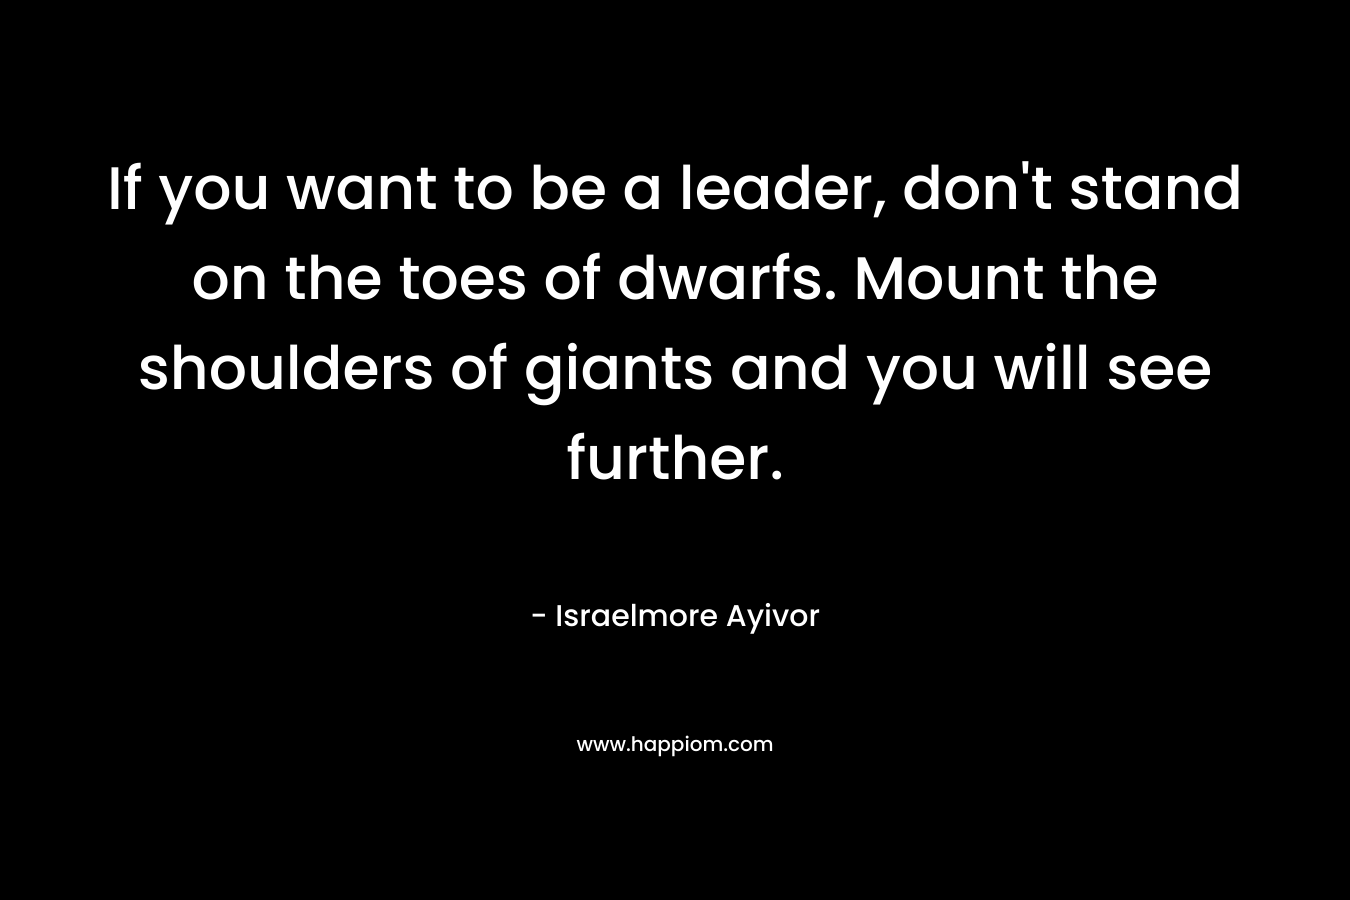 If you want to be a leader, don't stand on the toes of dwarfs. Mount the shoulders of giants and you will see further.